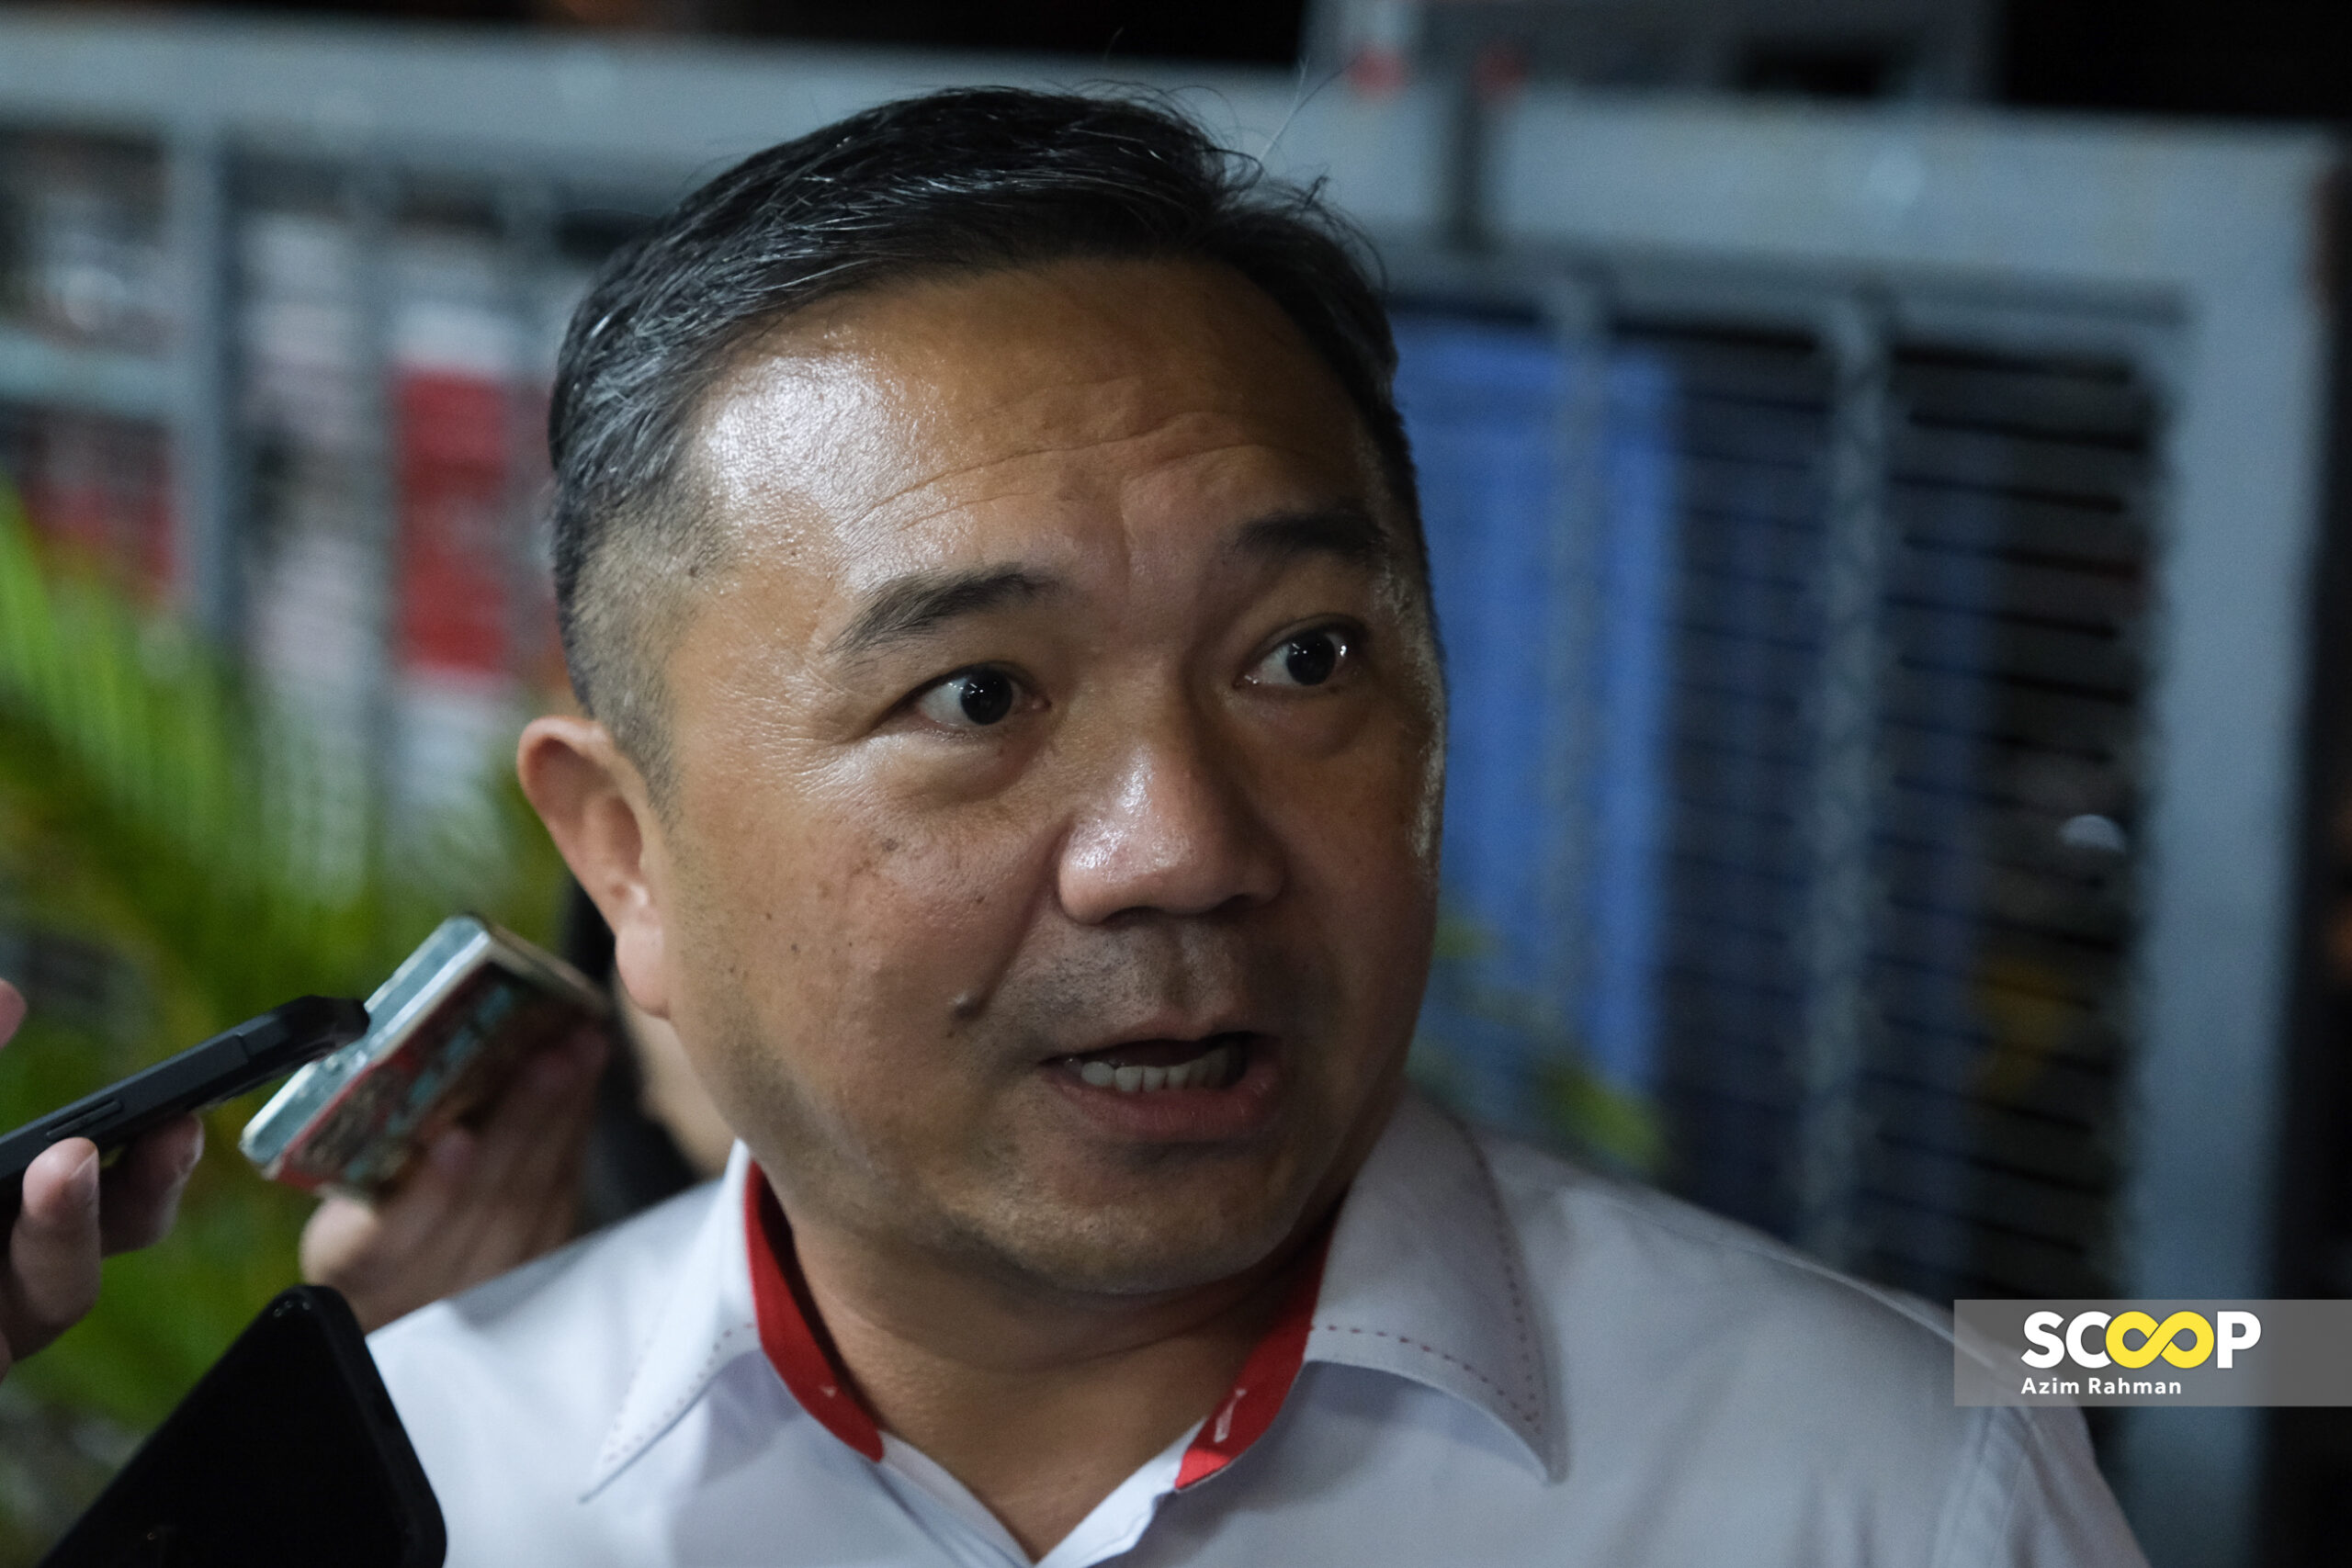 No monopoly: Asia Mobiliti not given bus project based on direct negotiations, says exco